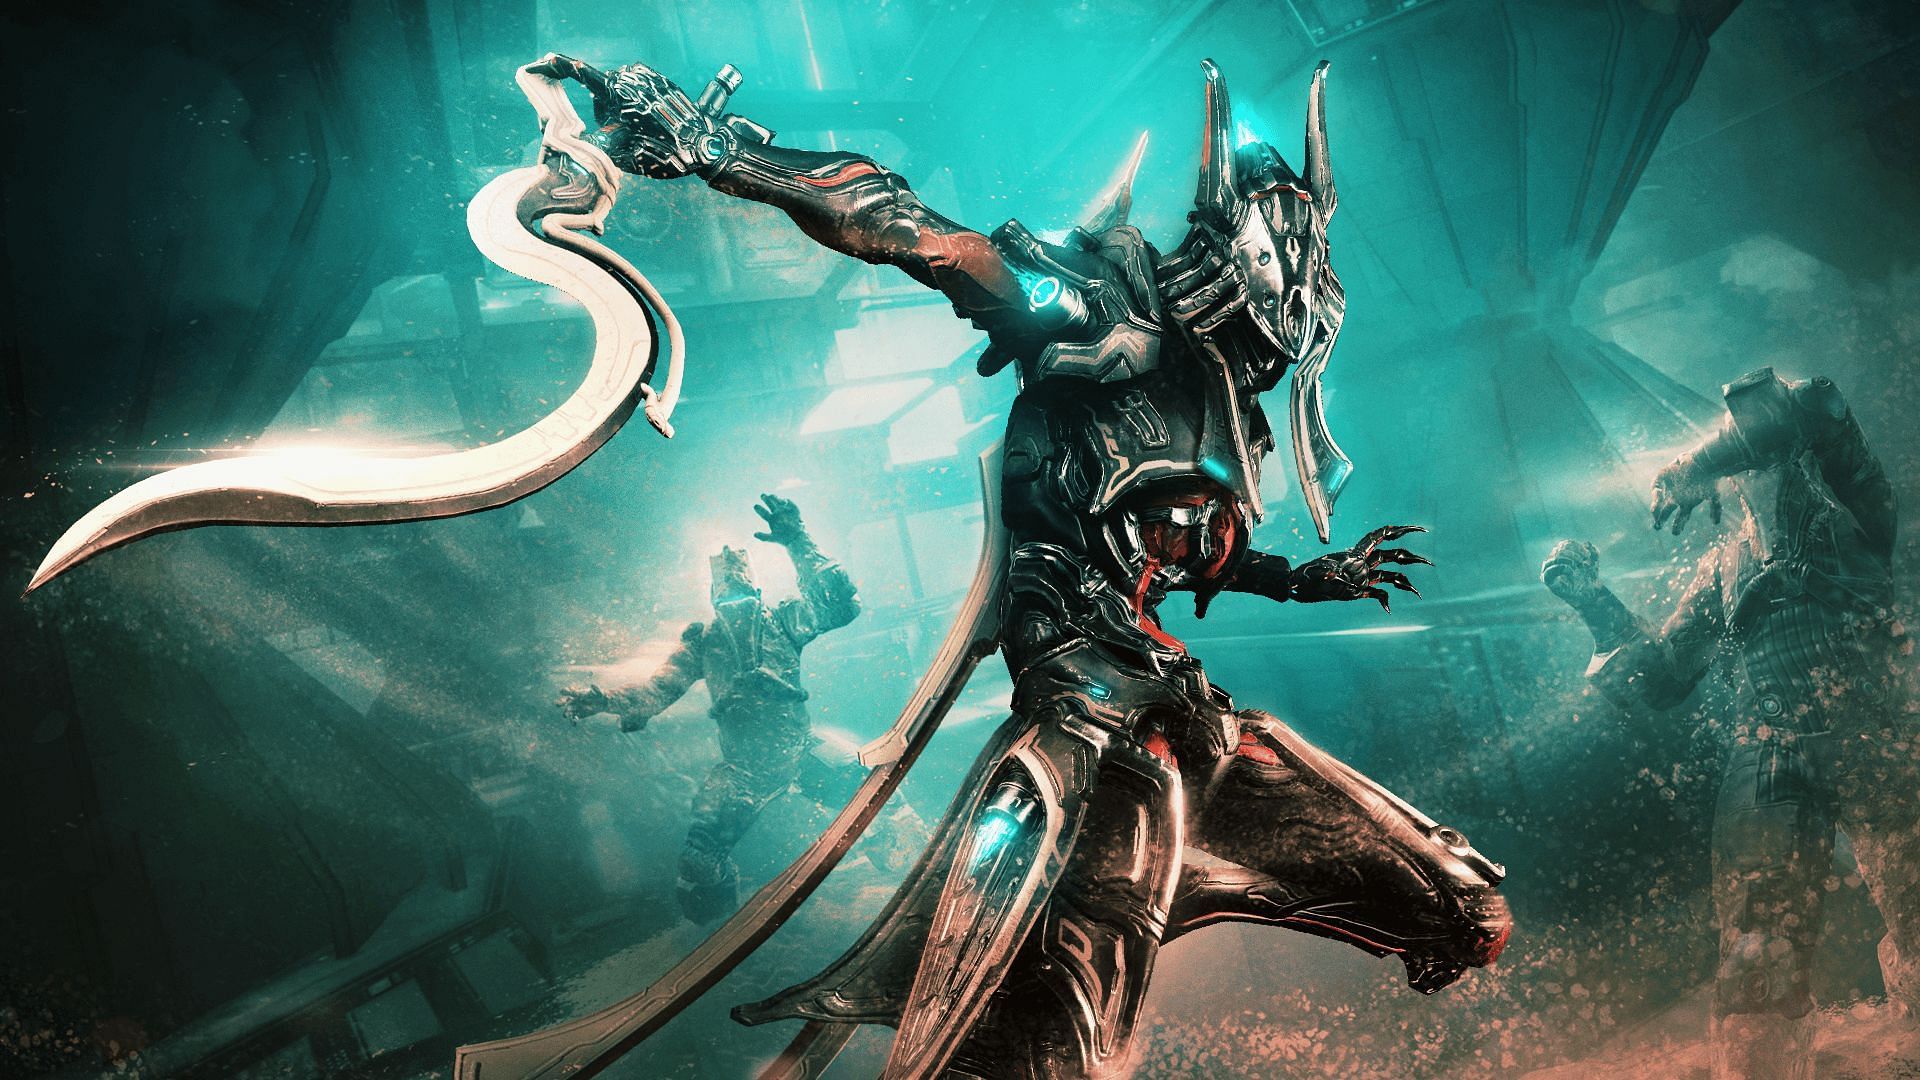 Inaros Ramses is the deluxe skin for Inaros and Inaros Prime (Image via Digital Extremes)